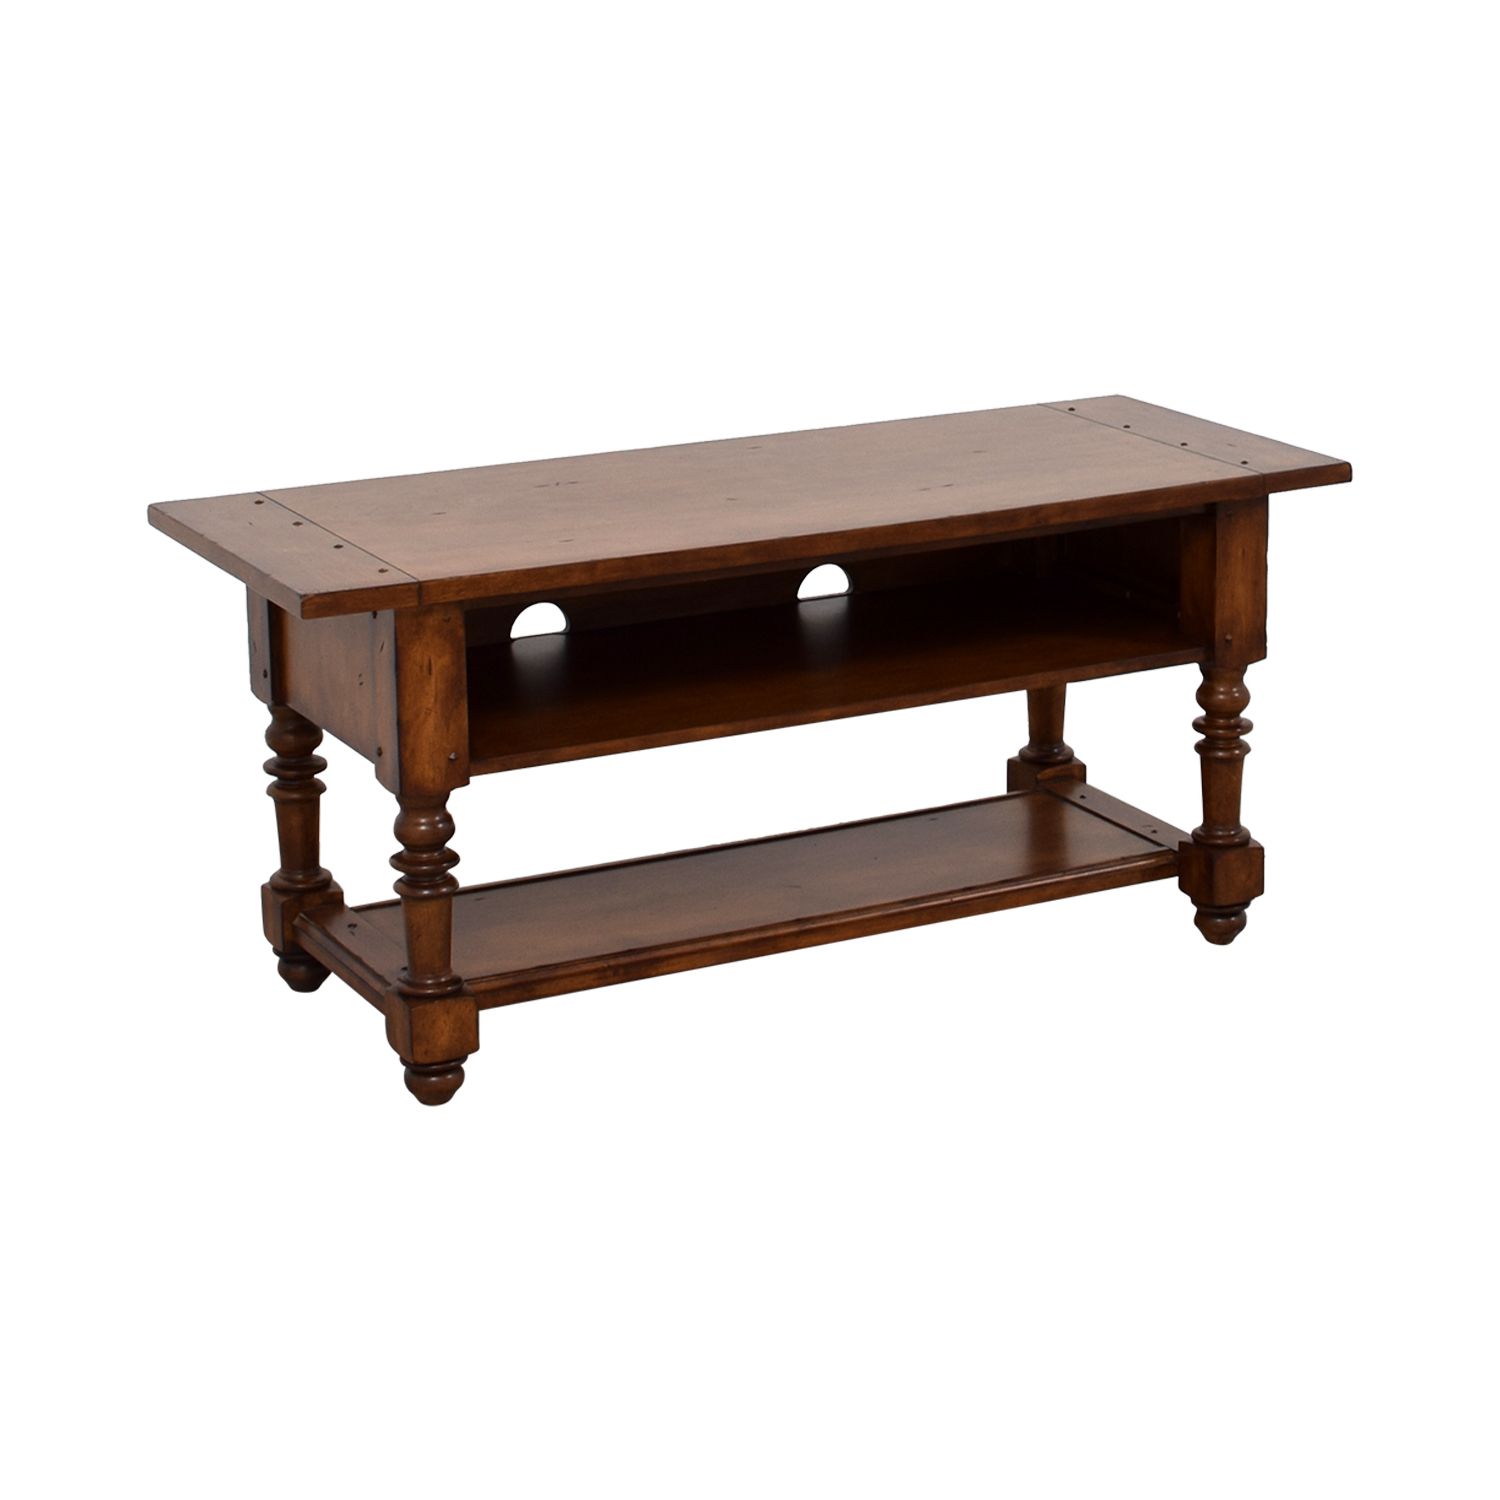 [%90% Off – Pottery Barn Pottery Barn Como Wood Tv Stand / Storage Within Widely Used Como Tv Stands|como Tv Stands With Regard To 2017 90% Off – Pottery Barn Pottery Barn Como Wood Tv Stand / Storage|well Known Como Tv Stands Regarding 90% Off – Pottery Barn Pottery Barn Como Wood Tv Stand / Storage|most Up To Date 90% Off – Pottery Barn Pottery Barn Como Wood Tv Stand / Storage With Como Tv Stands%] (Photo 11 of 20)